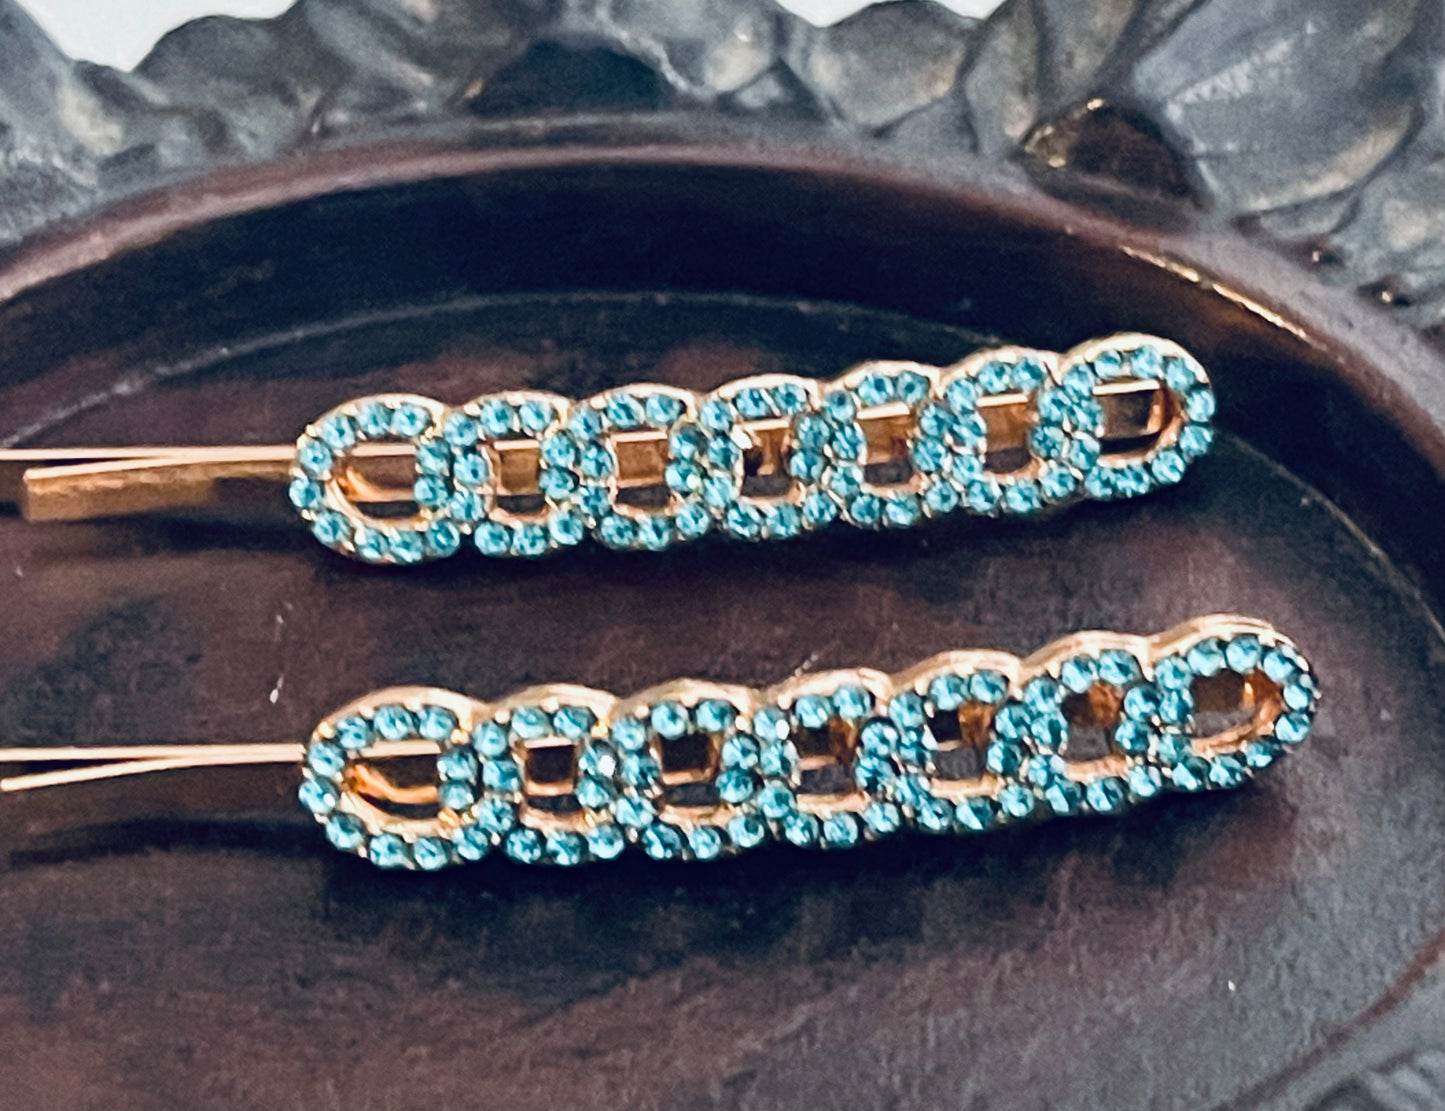 Blue teal Crystal rhinestone hairpins 2pc approximately 2.5” gold tone  formal hair accessories gift wedding bridesmaid princess accessory